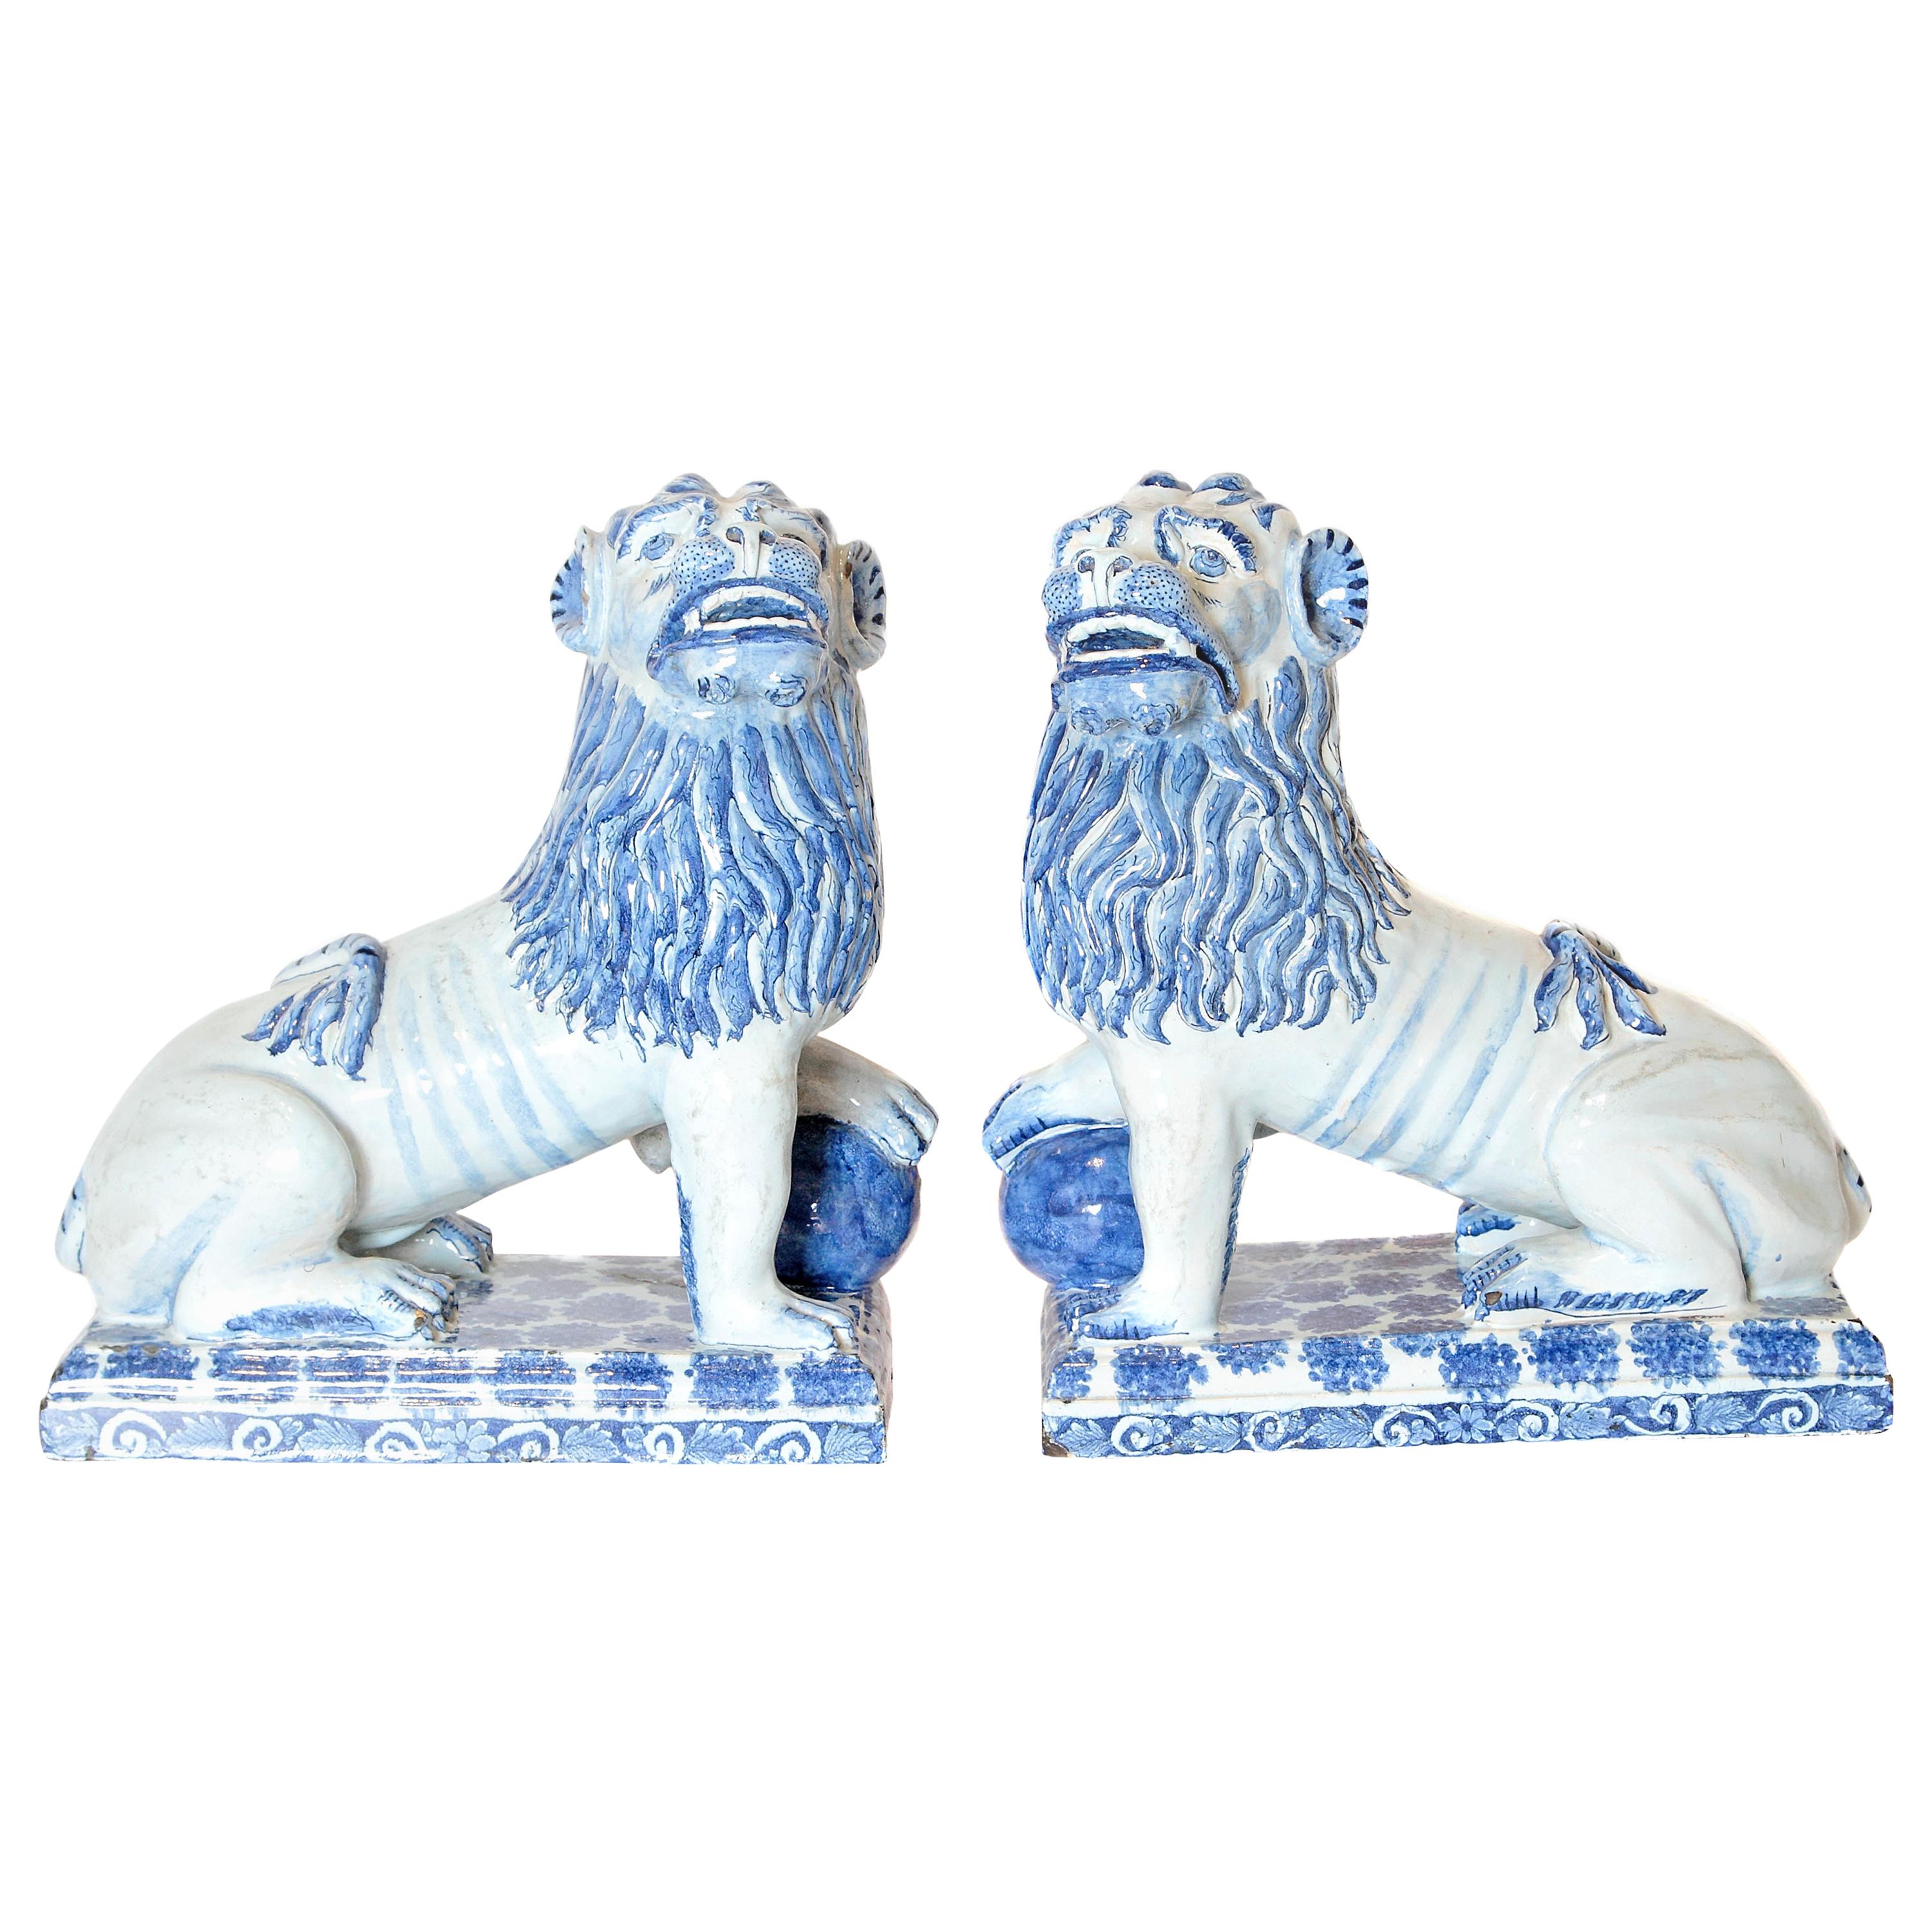 Pair of 18th Century French Faience Seated Lions